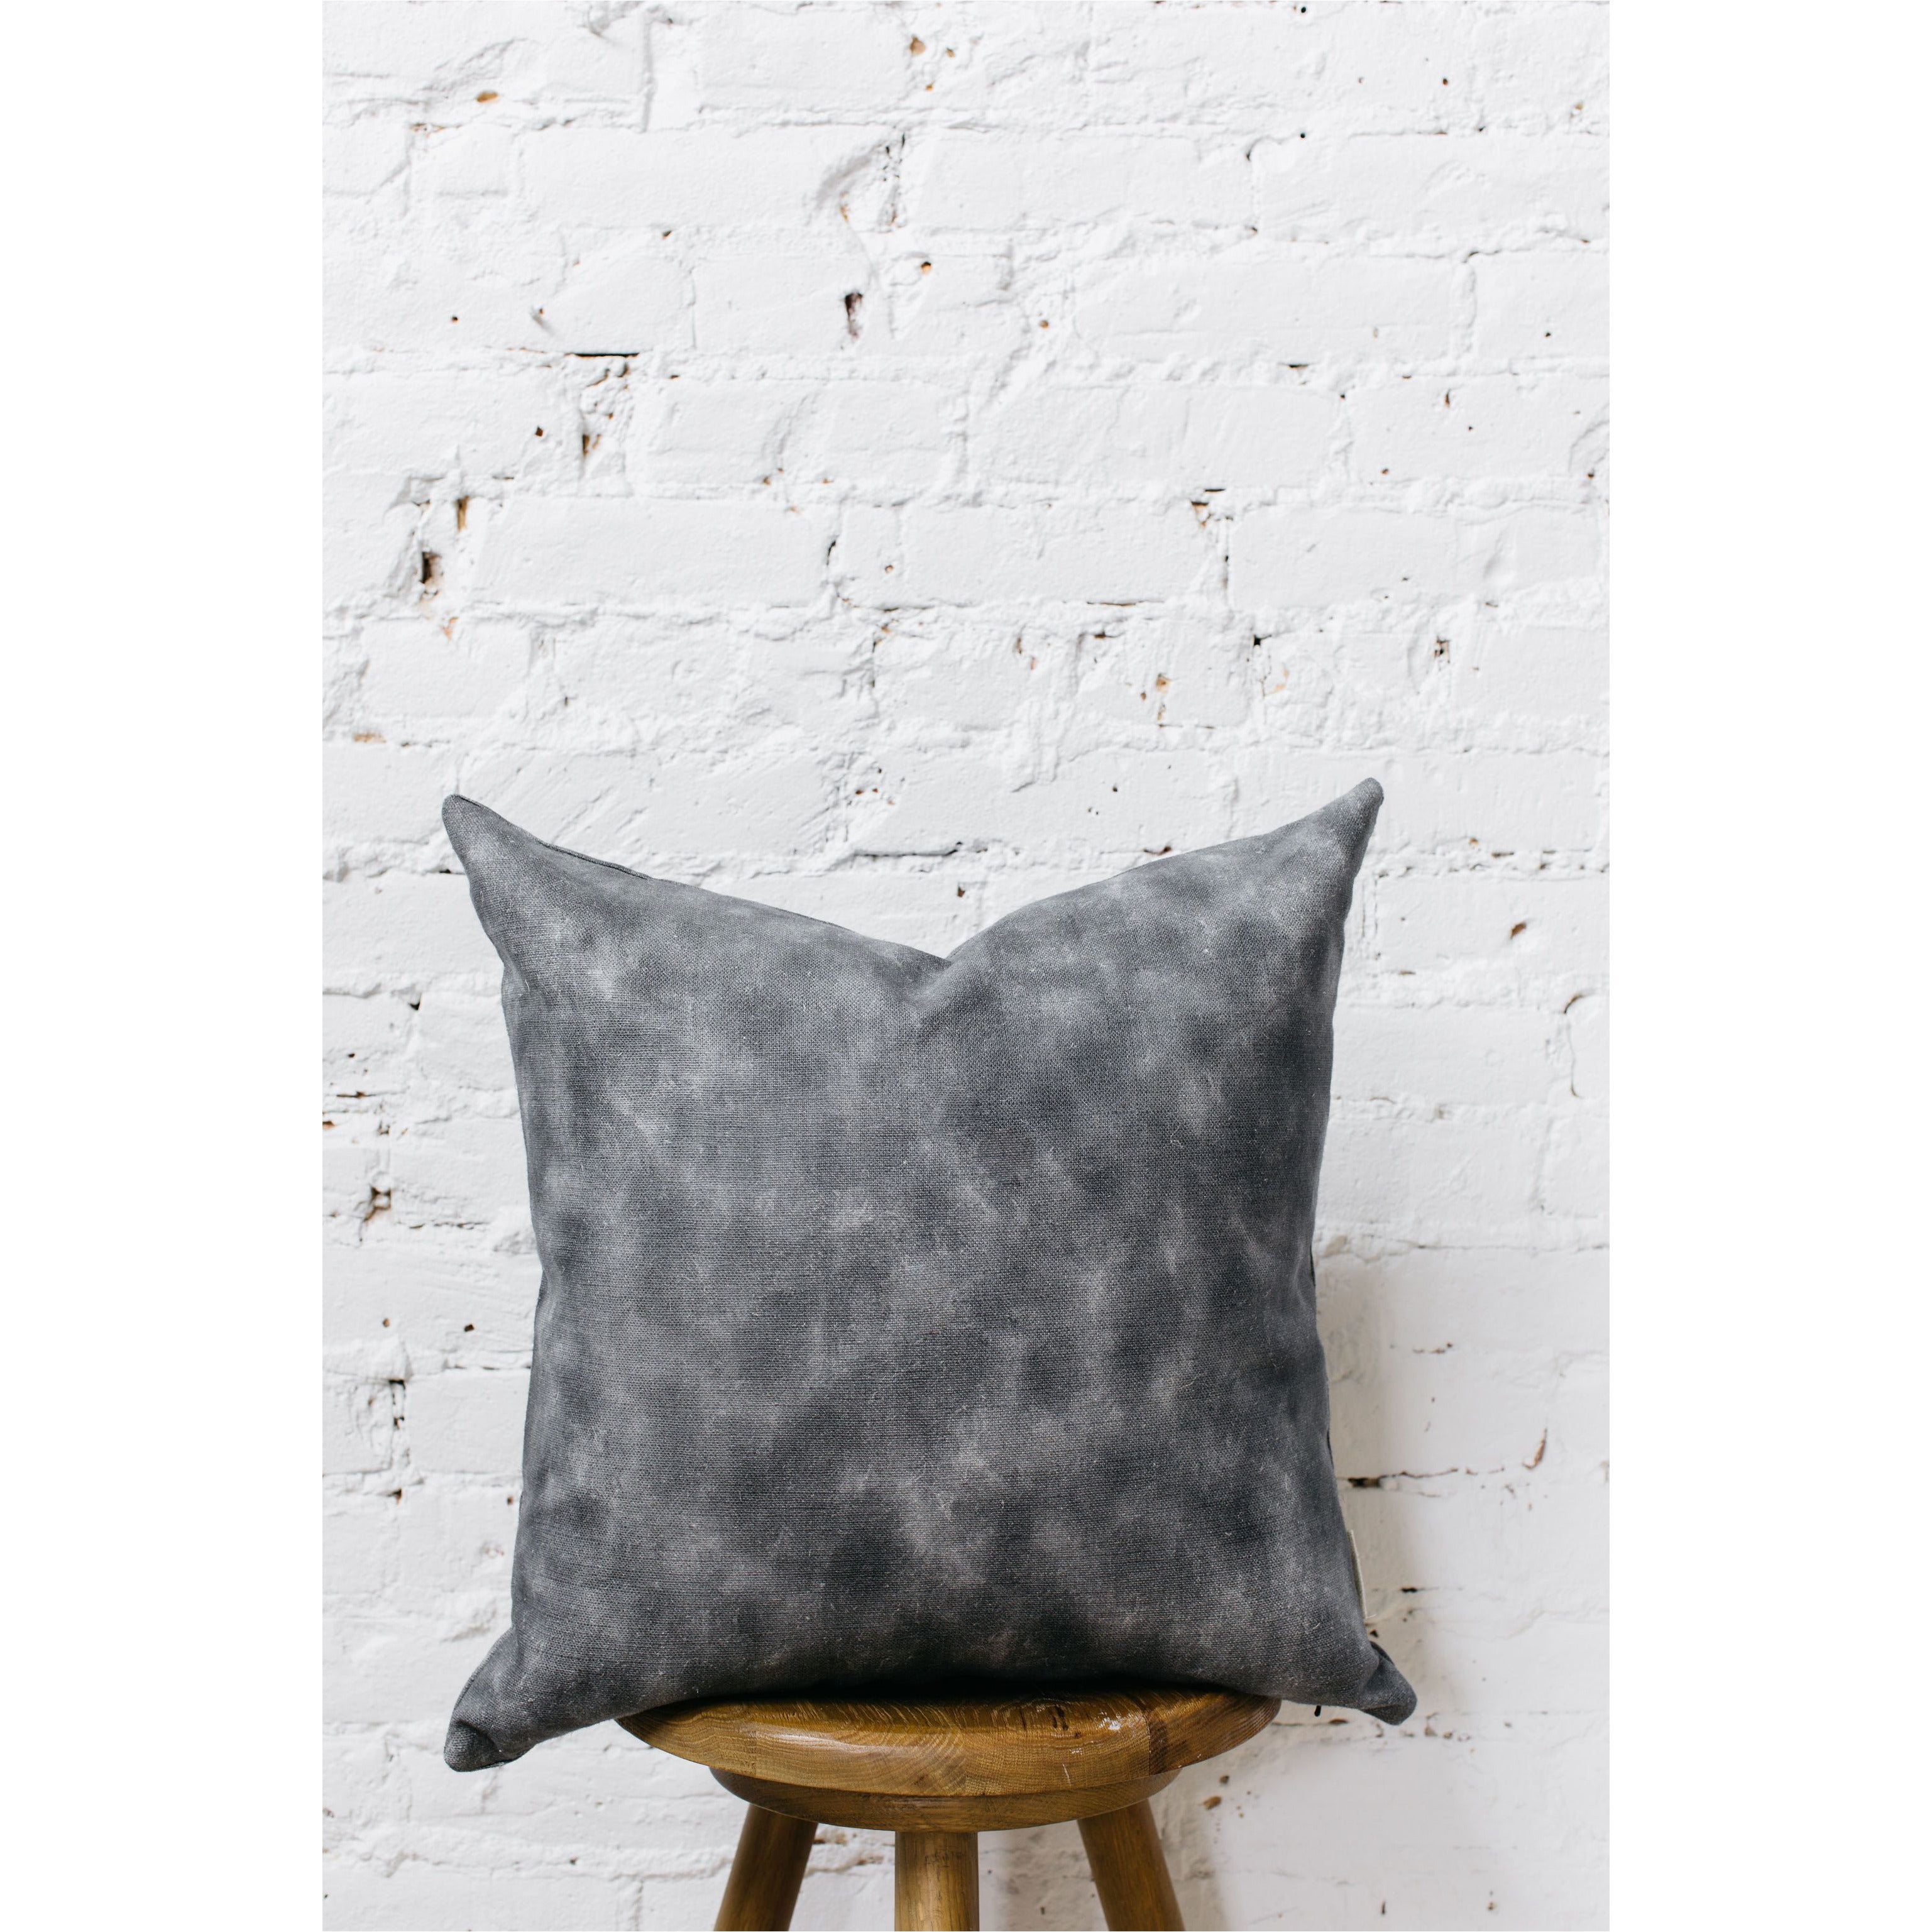 The Watercolor Pillow Cover